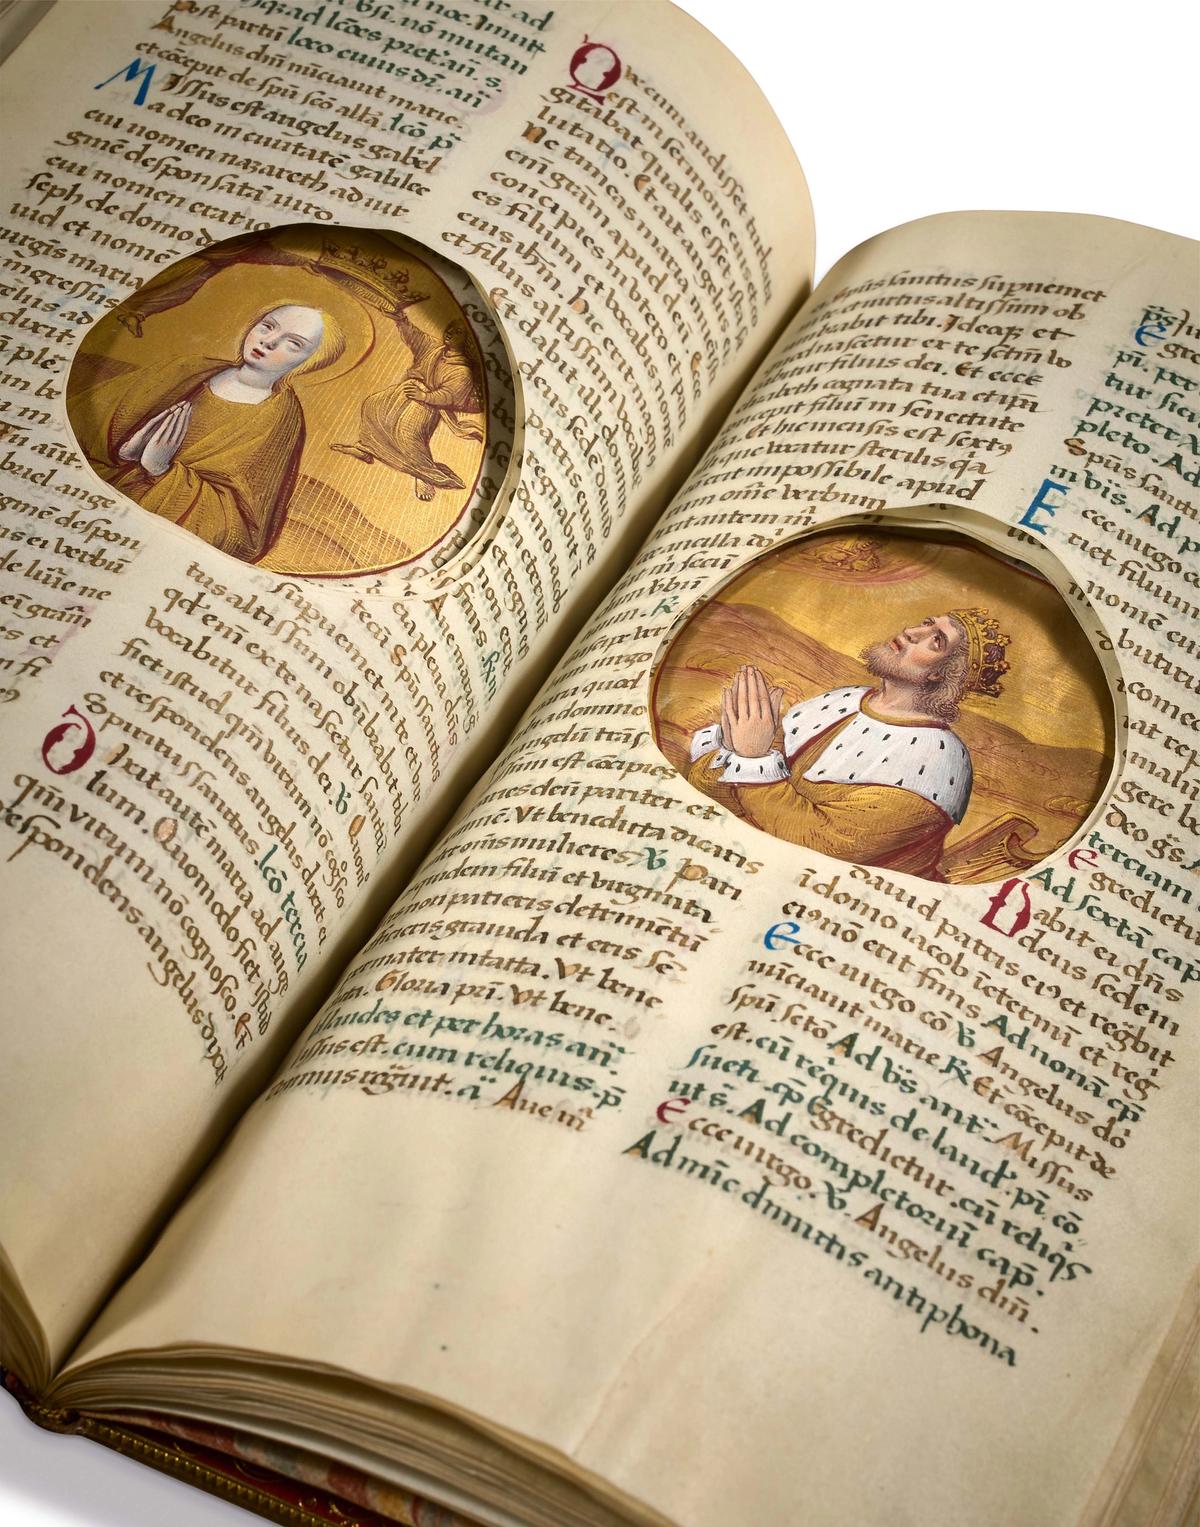 The illuminated Petau-Rothschild’s Hours, painted on vellum in the Loire Valley by Jean Poyet in the 16th century, now estimated at €700,000-€900,000 in the Aristophil auction in Paris Aguttes